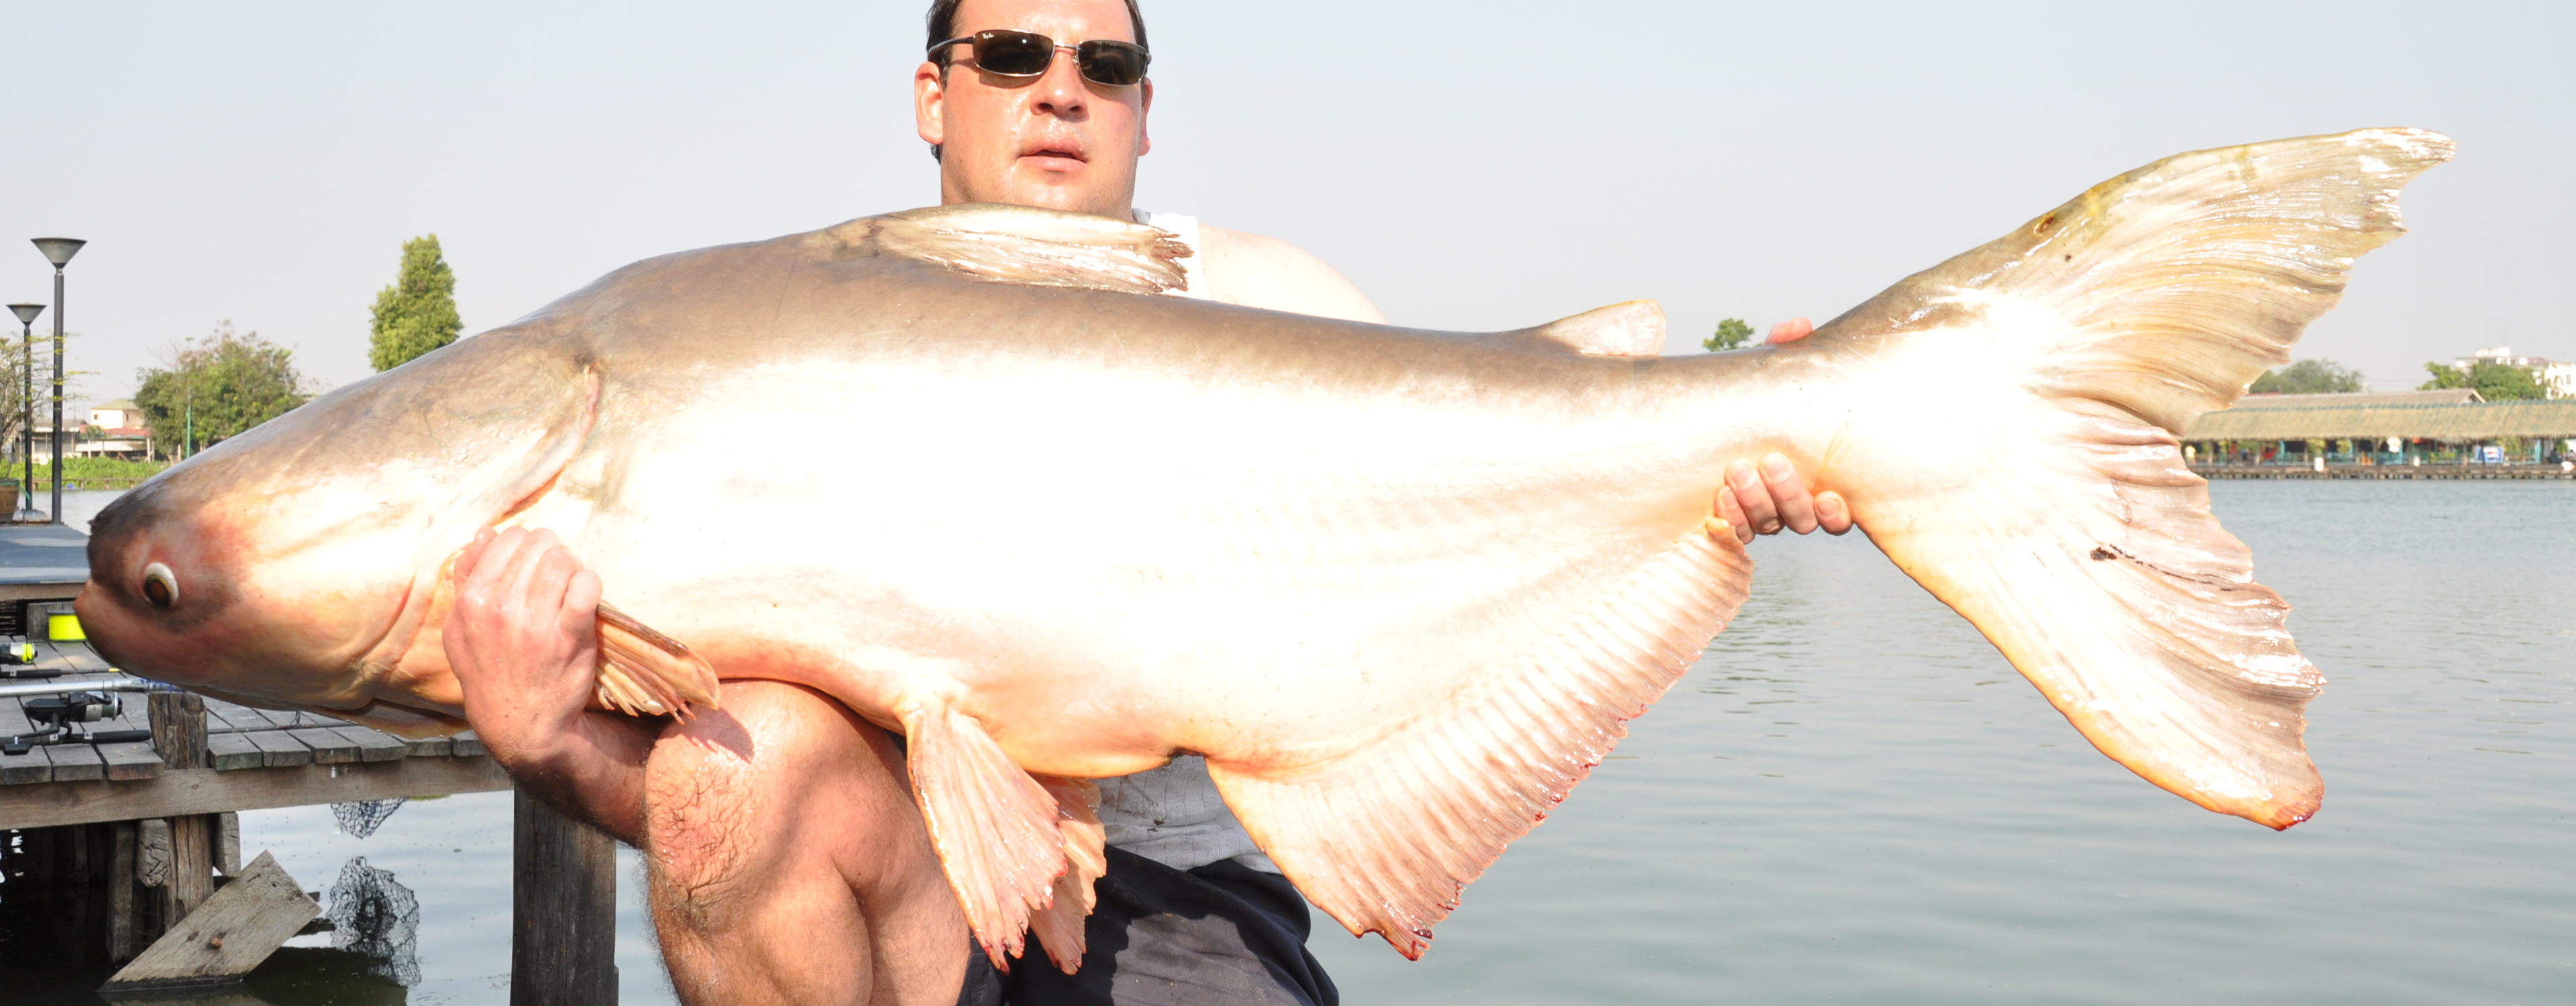 Fishery owner James Peacock holding a 103lb Giant Mekong Catfish caught on a fishing expedition in Thailand